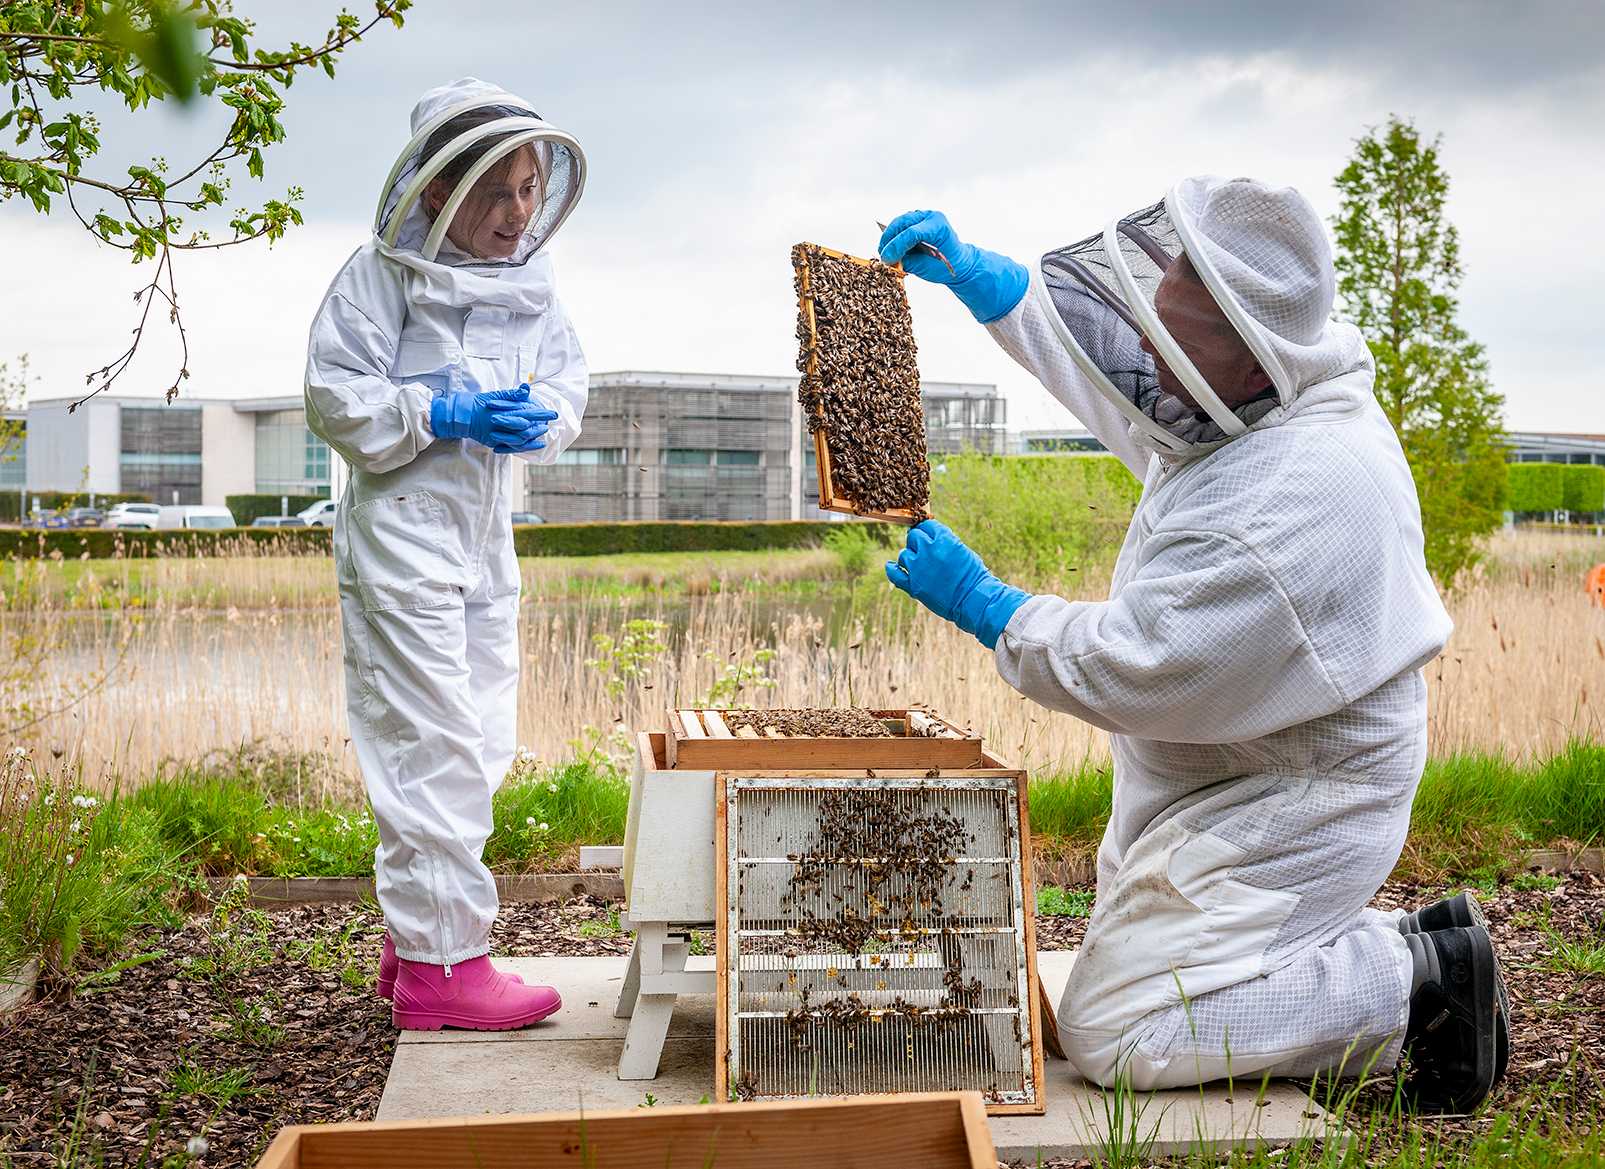 ROLLS-ROYCE APPOINTS POPPY LIDDLE AS FIRST-EVER JUNIOR BEEKEEPER